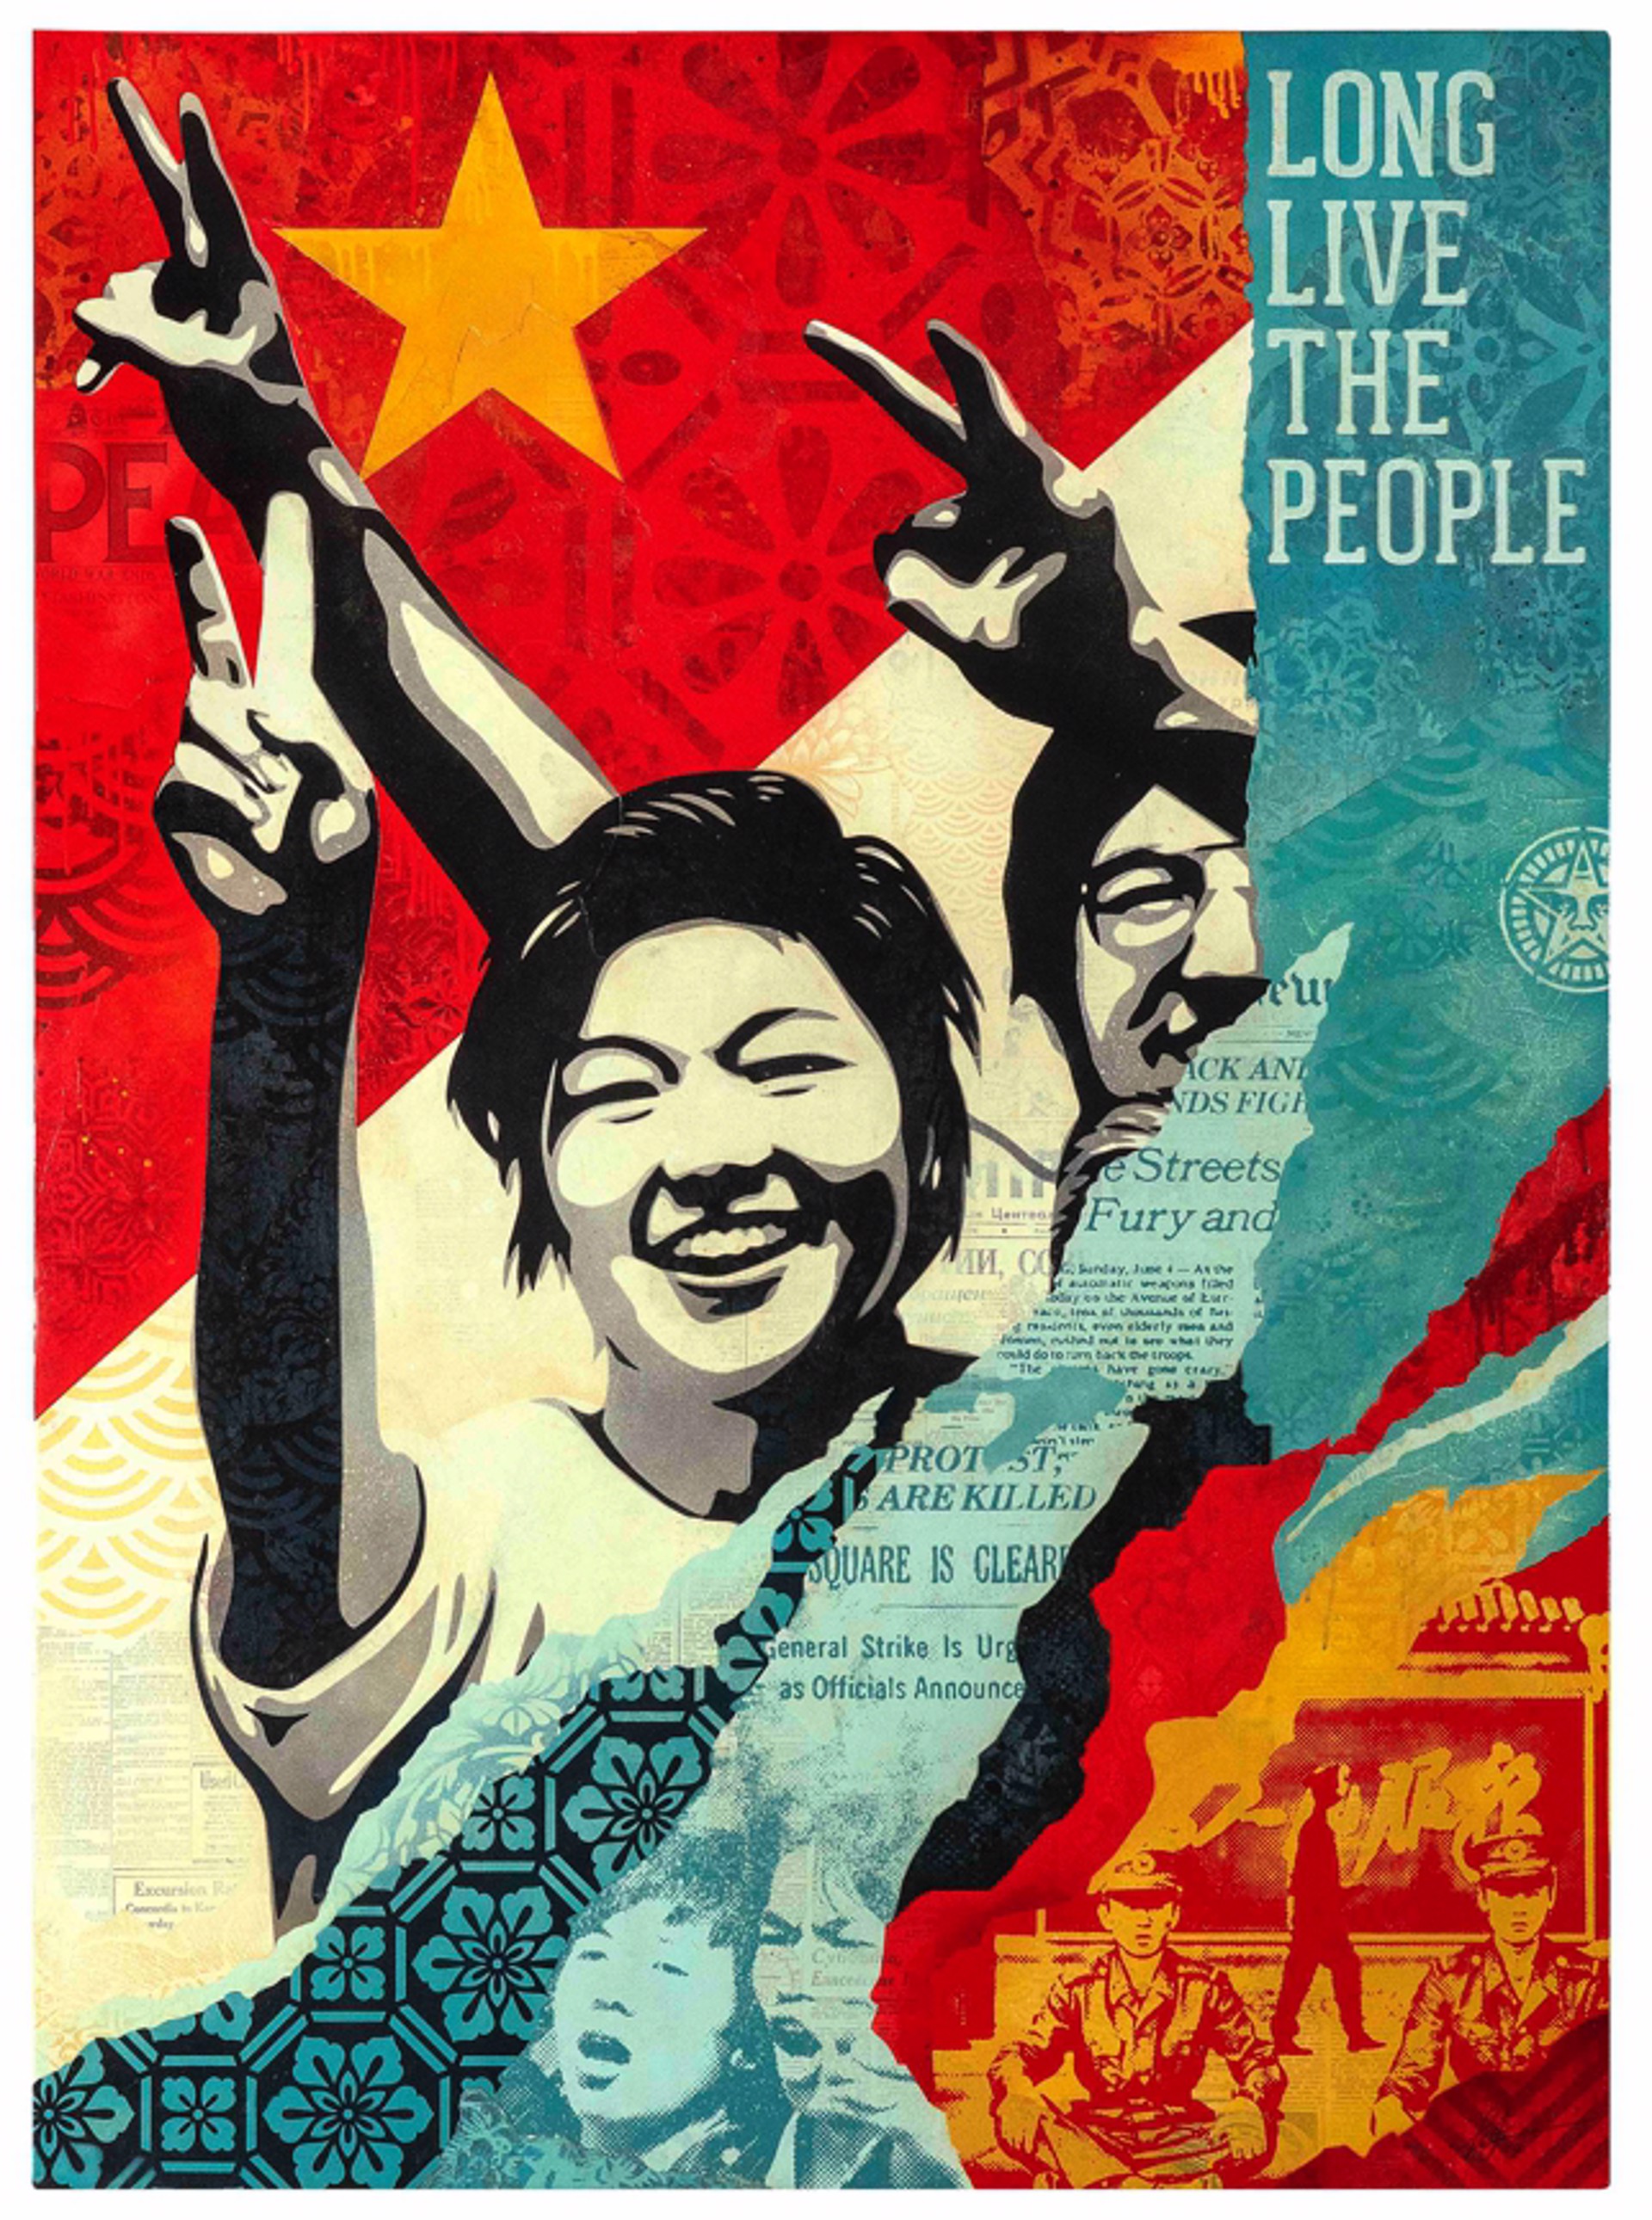 Long Live The People by Shepard Fairey